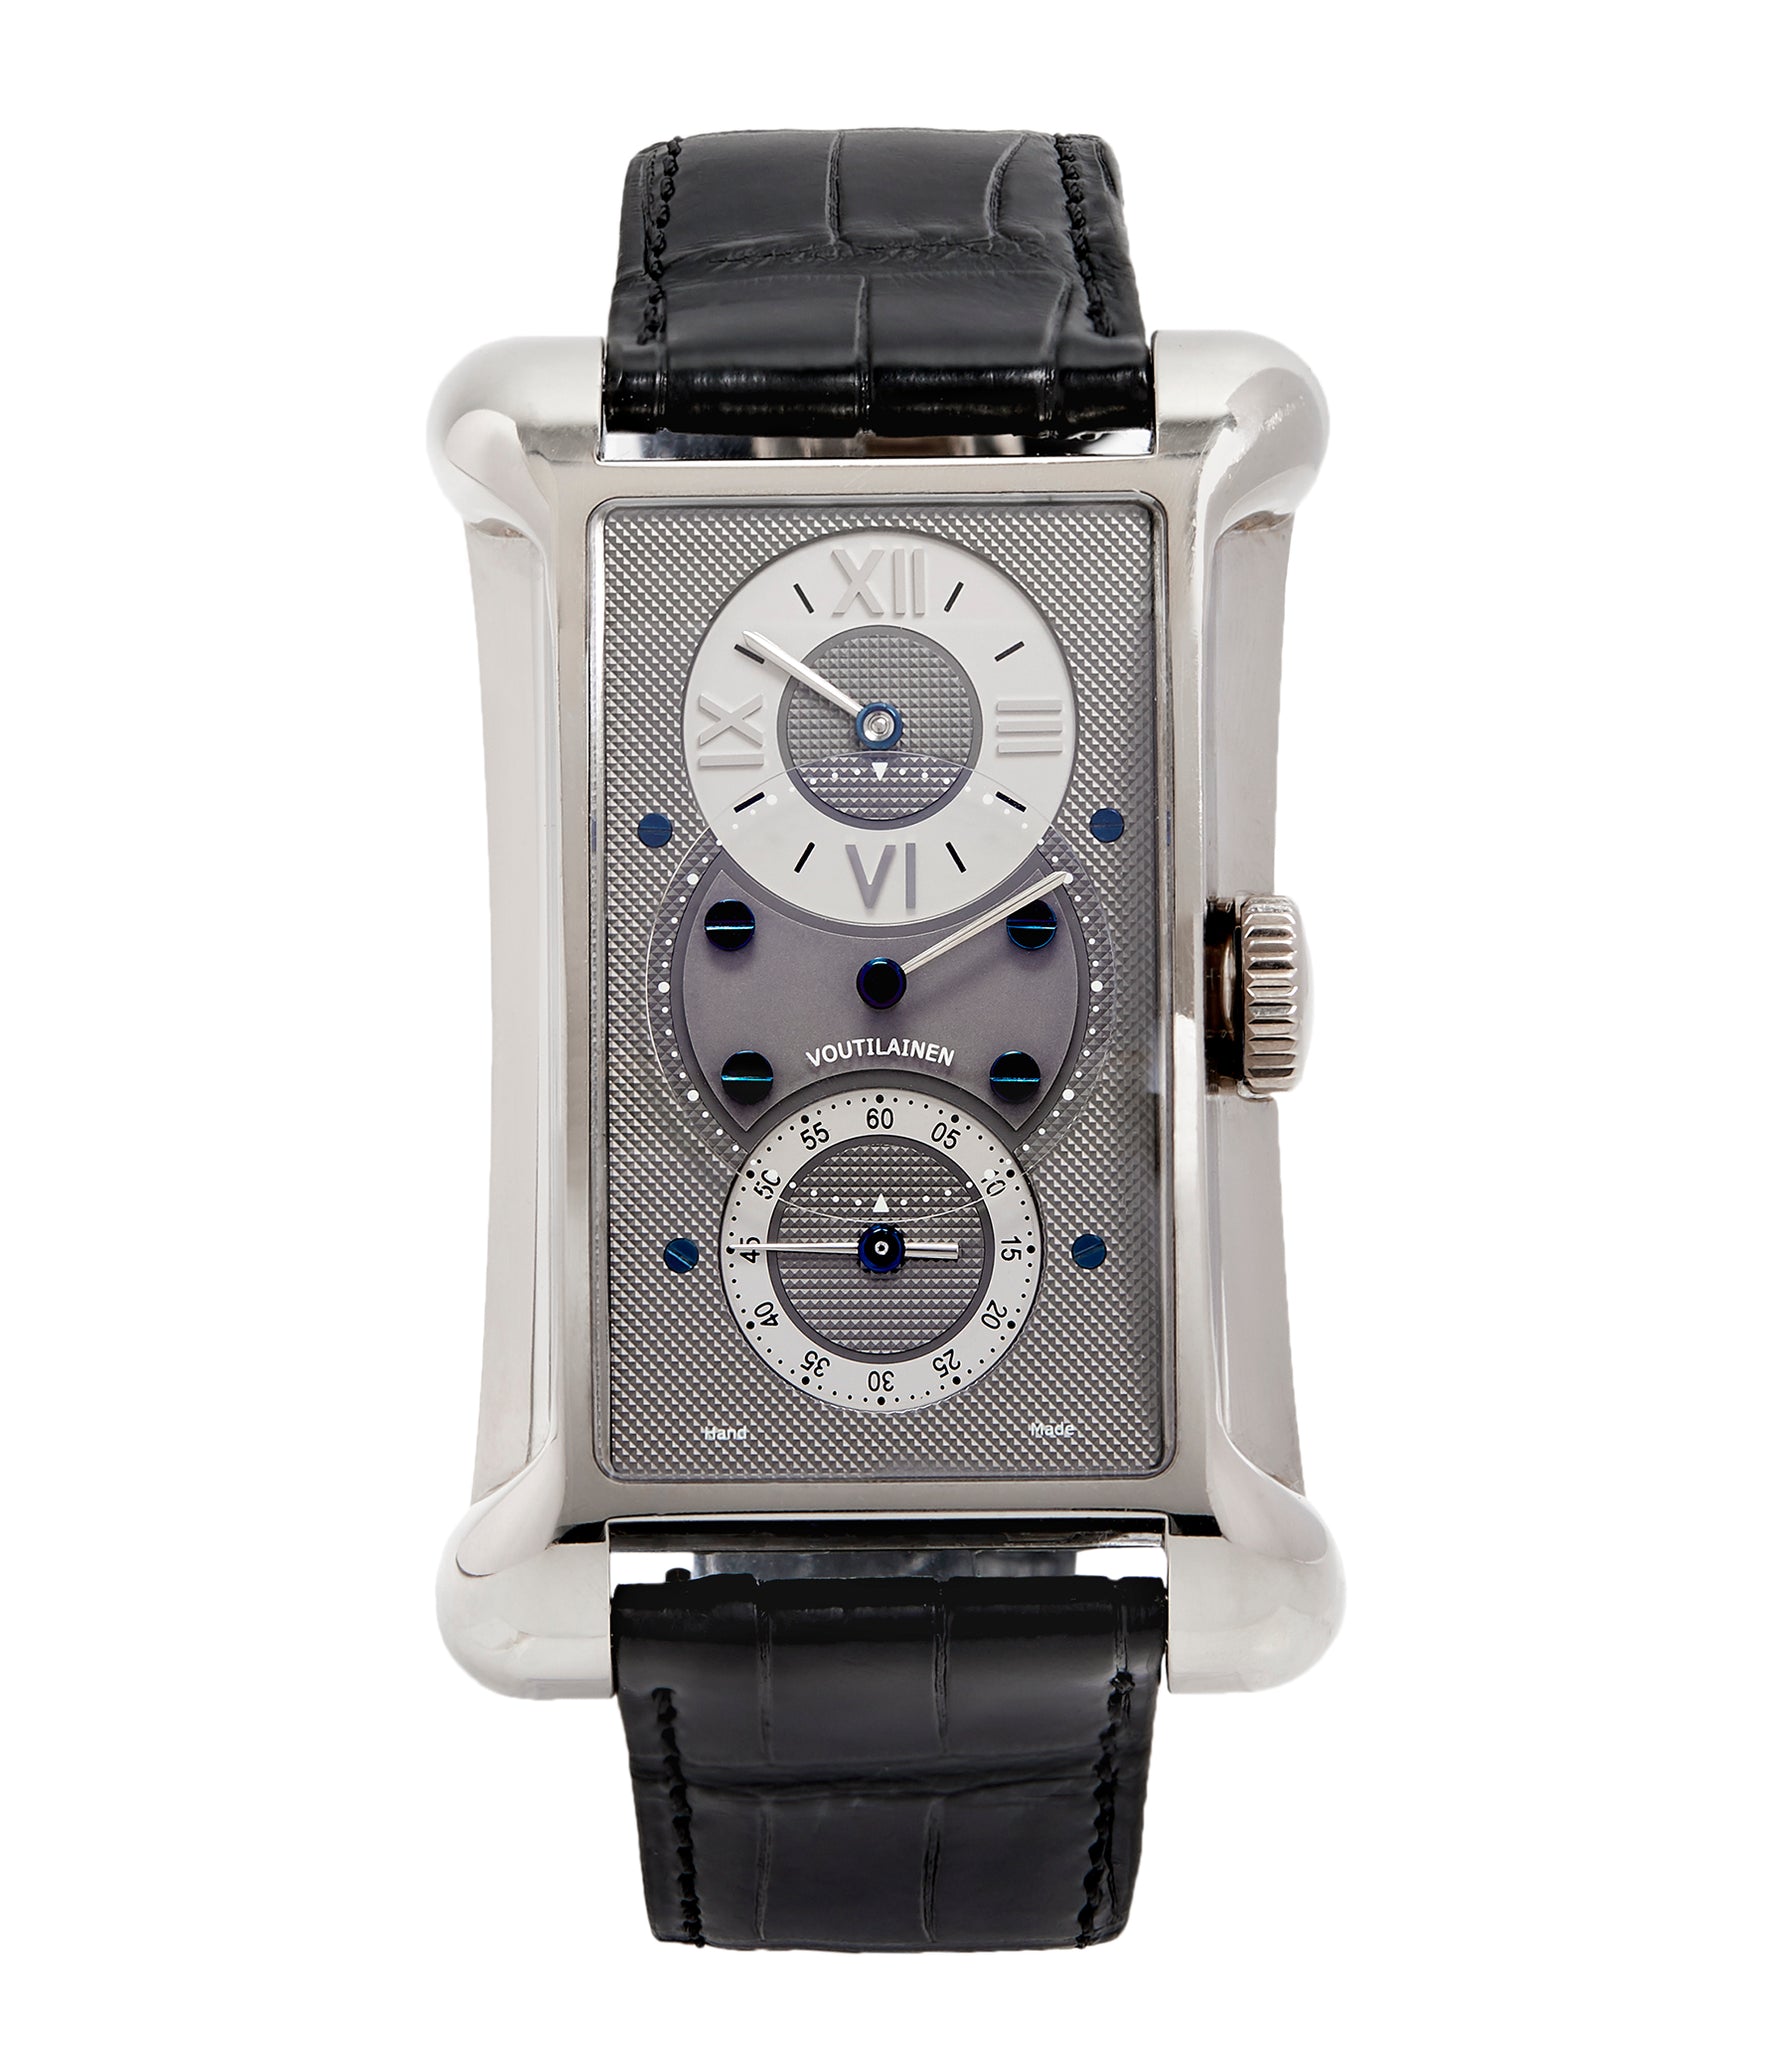 Voutilainen C27 Chronometre white gold Limited Edition white gold watch by Kari Voutilainen for sale online at approved re-seller A Collected Man London UK specialist of rare watches